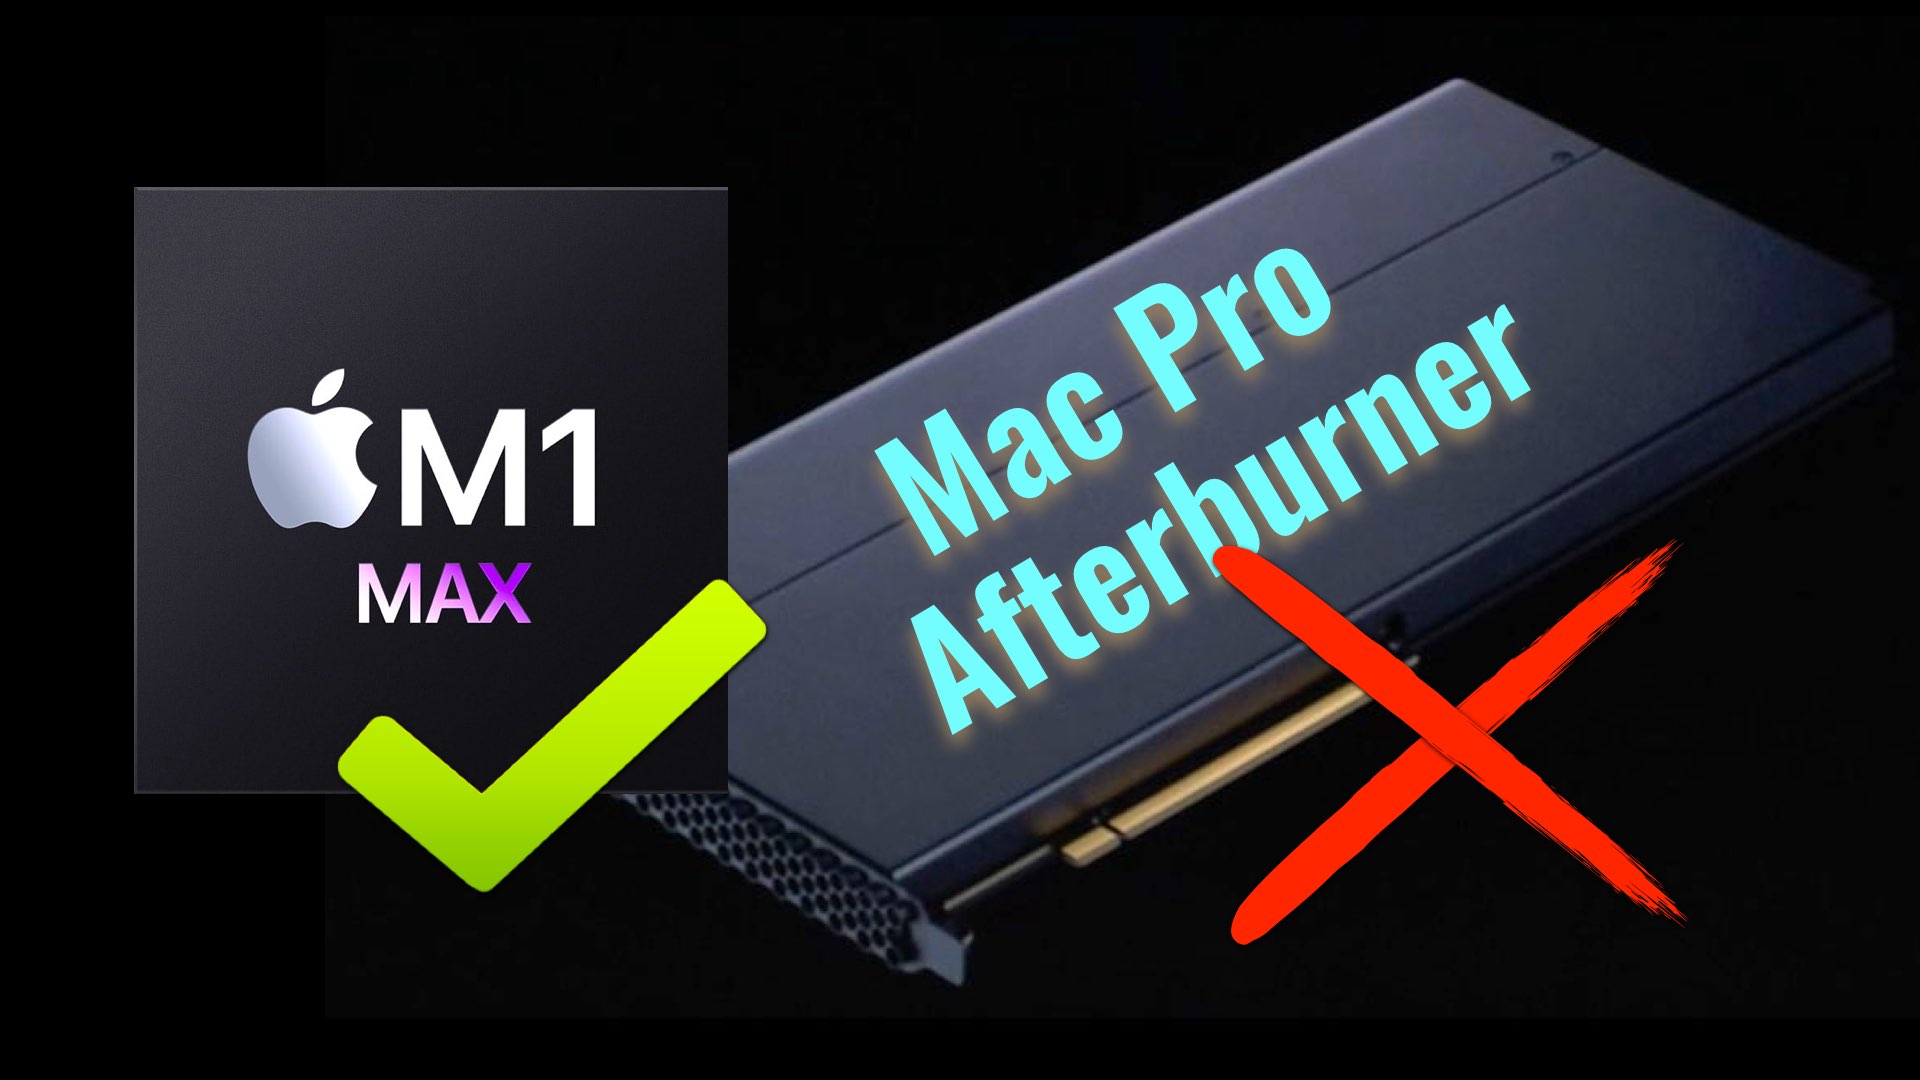 Apple Senior Executives: “The Mac Pro with the Afterburner card is left in the dust by the M1 Pro and M1 Max”